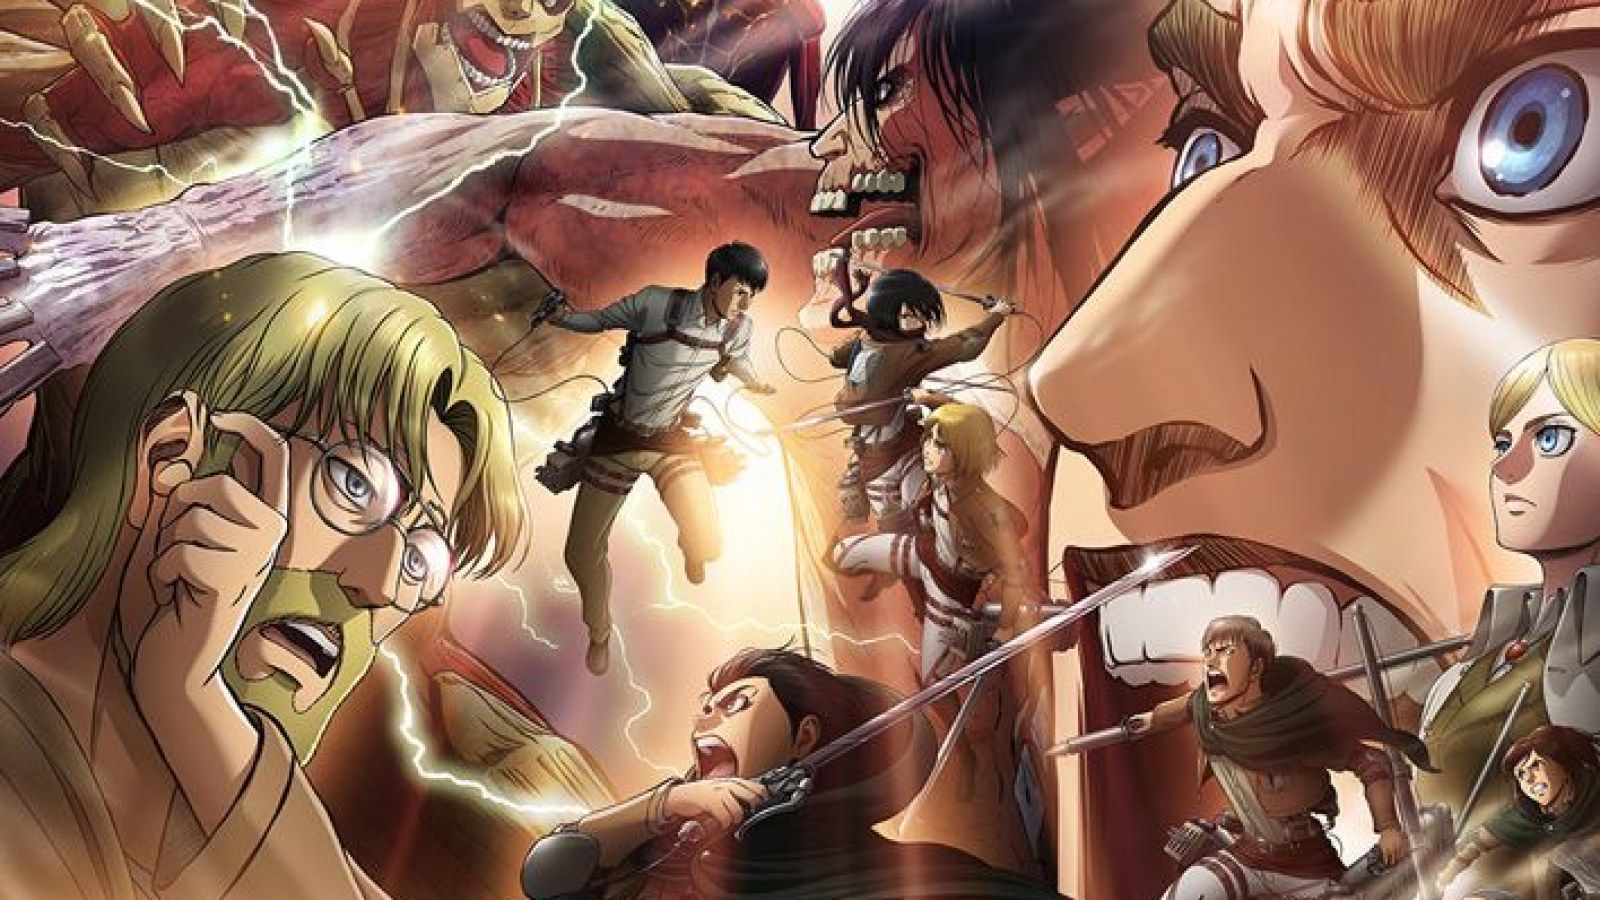 Attack on Titan' Season Part 2 Simulcast Pushed Back Following Leaks, Piracy Concerns